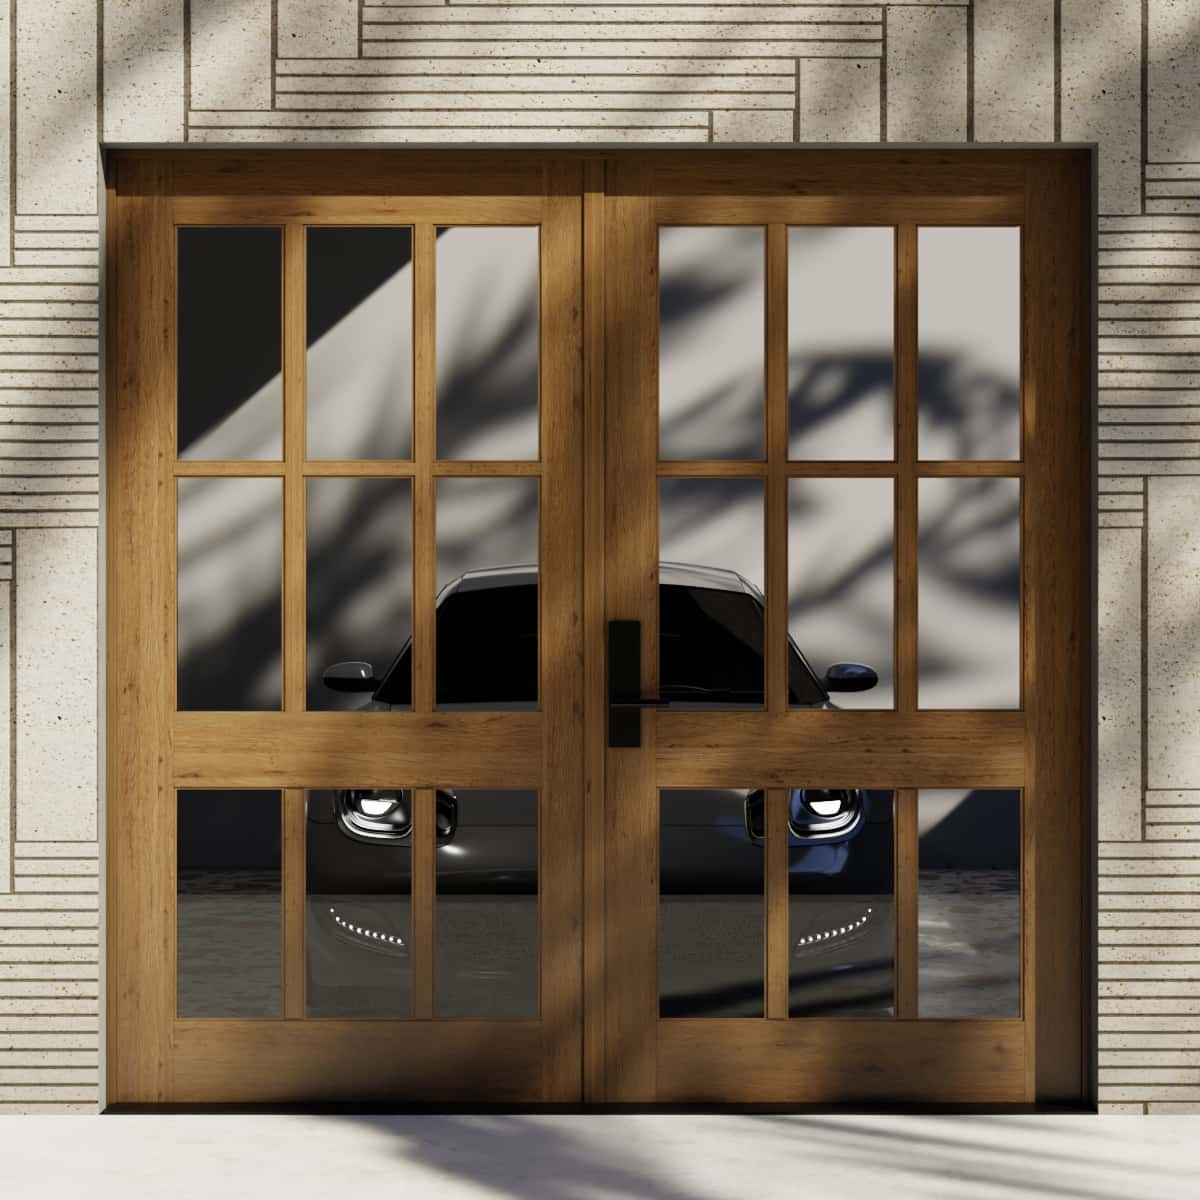 Bellevue Carriage Style Garage Doors with Glass